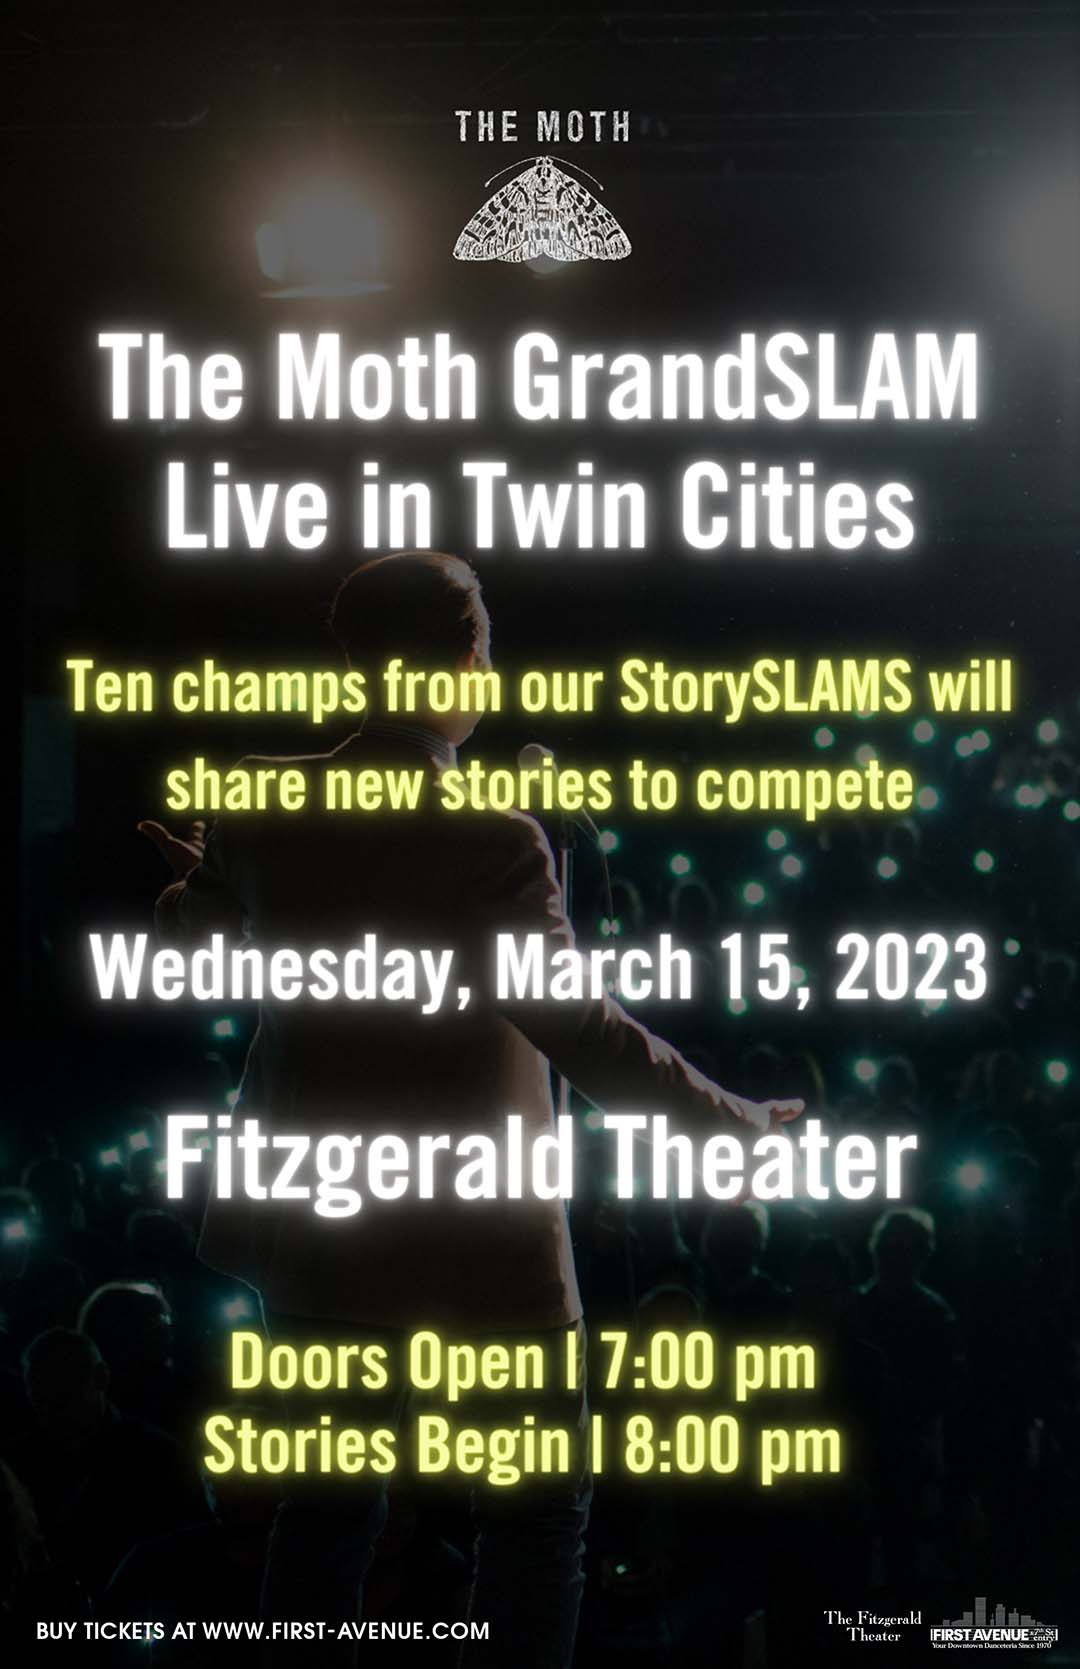 THE MOTH at FITZGERALDS!